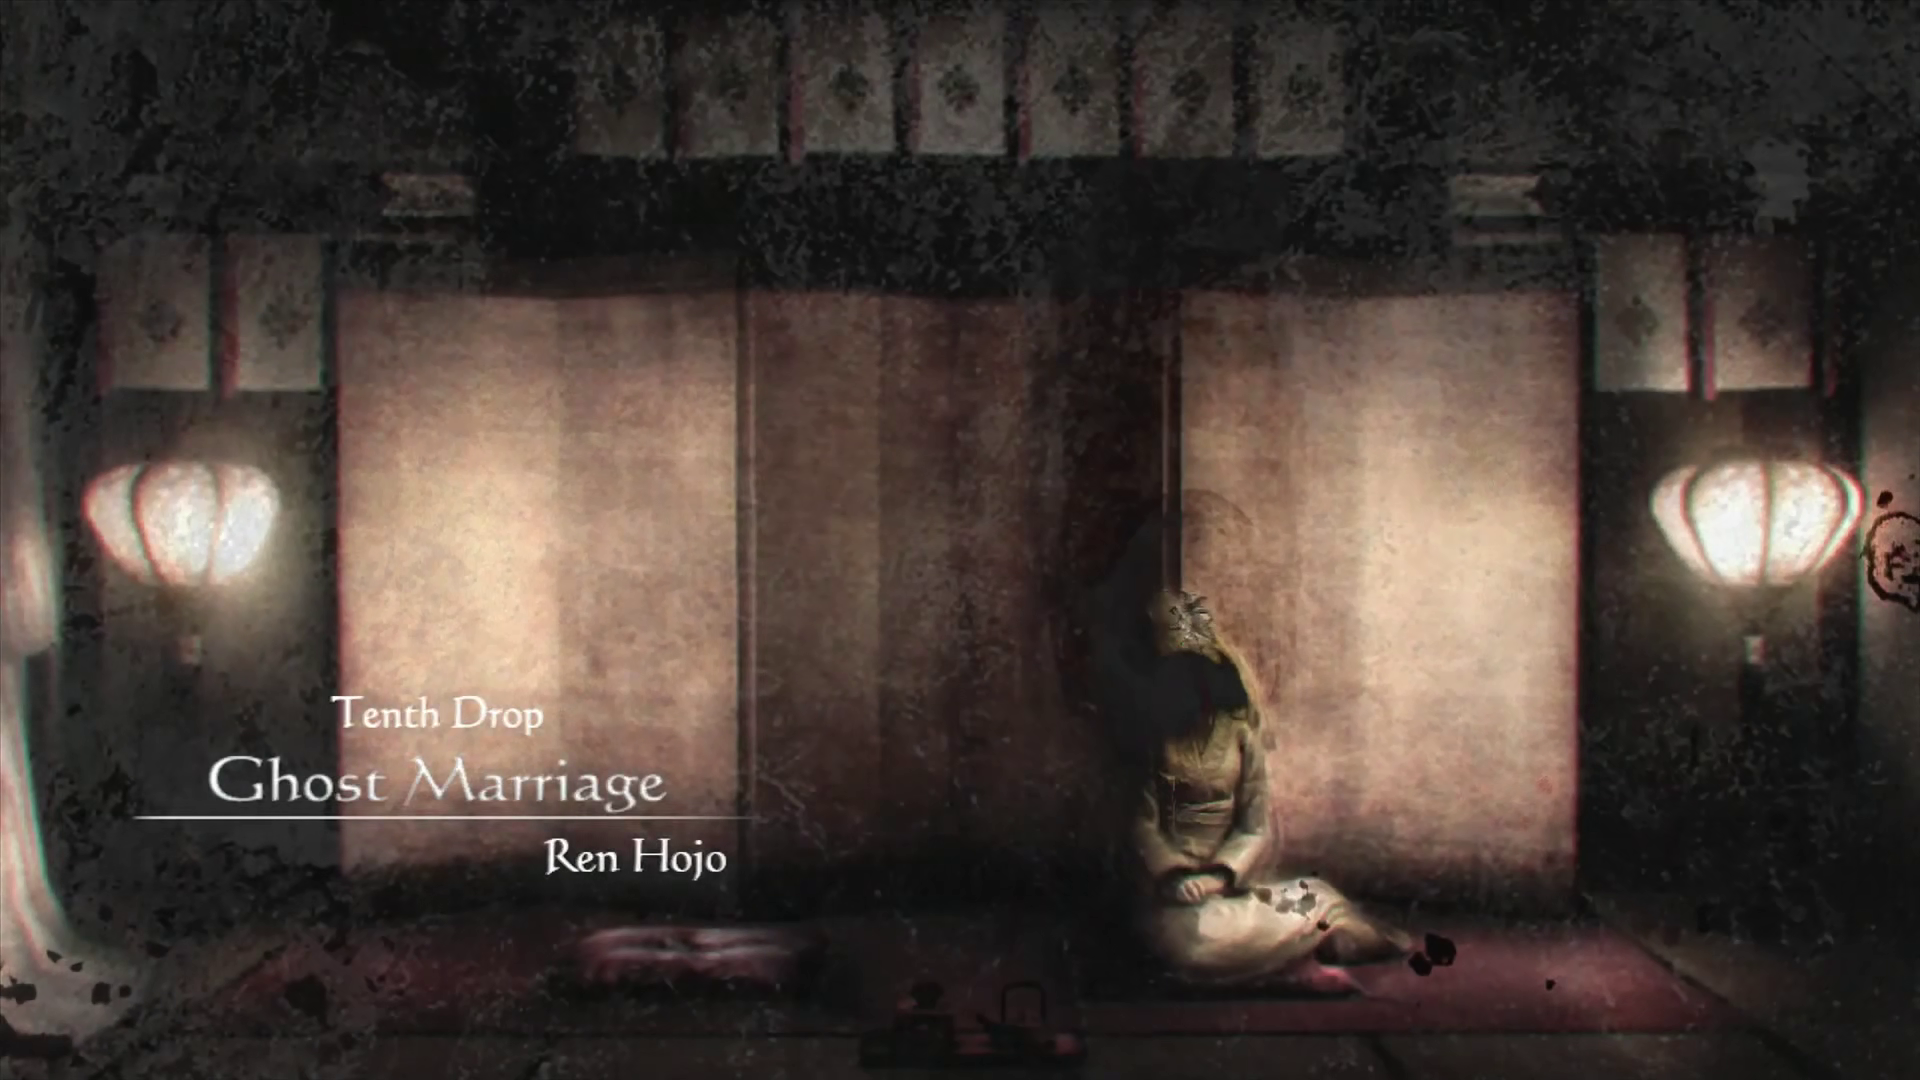 FATAL FRAME / PROJECT ZERO: Maiden of Black Water Story Guide - All Drops Detailed Info - 𝕋𝕖𝕟𝕥𝕙 𝔻𝕣𝕠𝕡 - 𝔾𝕙𝕠𝕤𝕥 𝕄𝕒𝕣𝕣𝕚𝕒𝕘𝕖 - 8B728BF